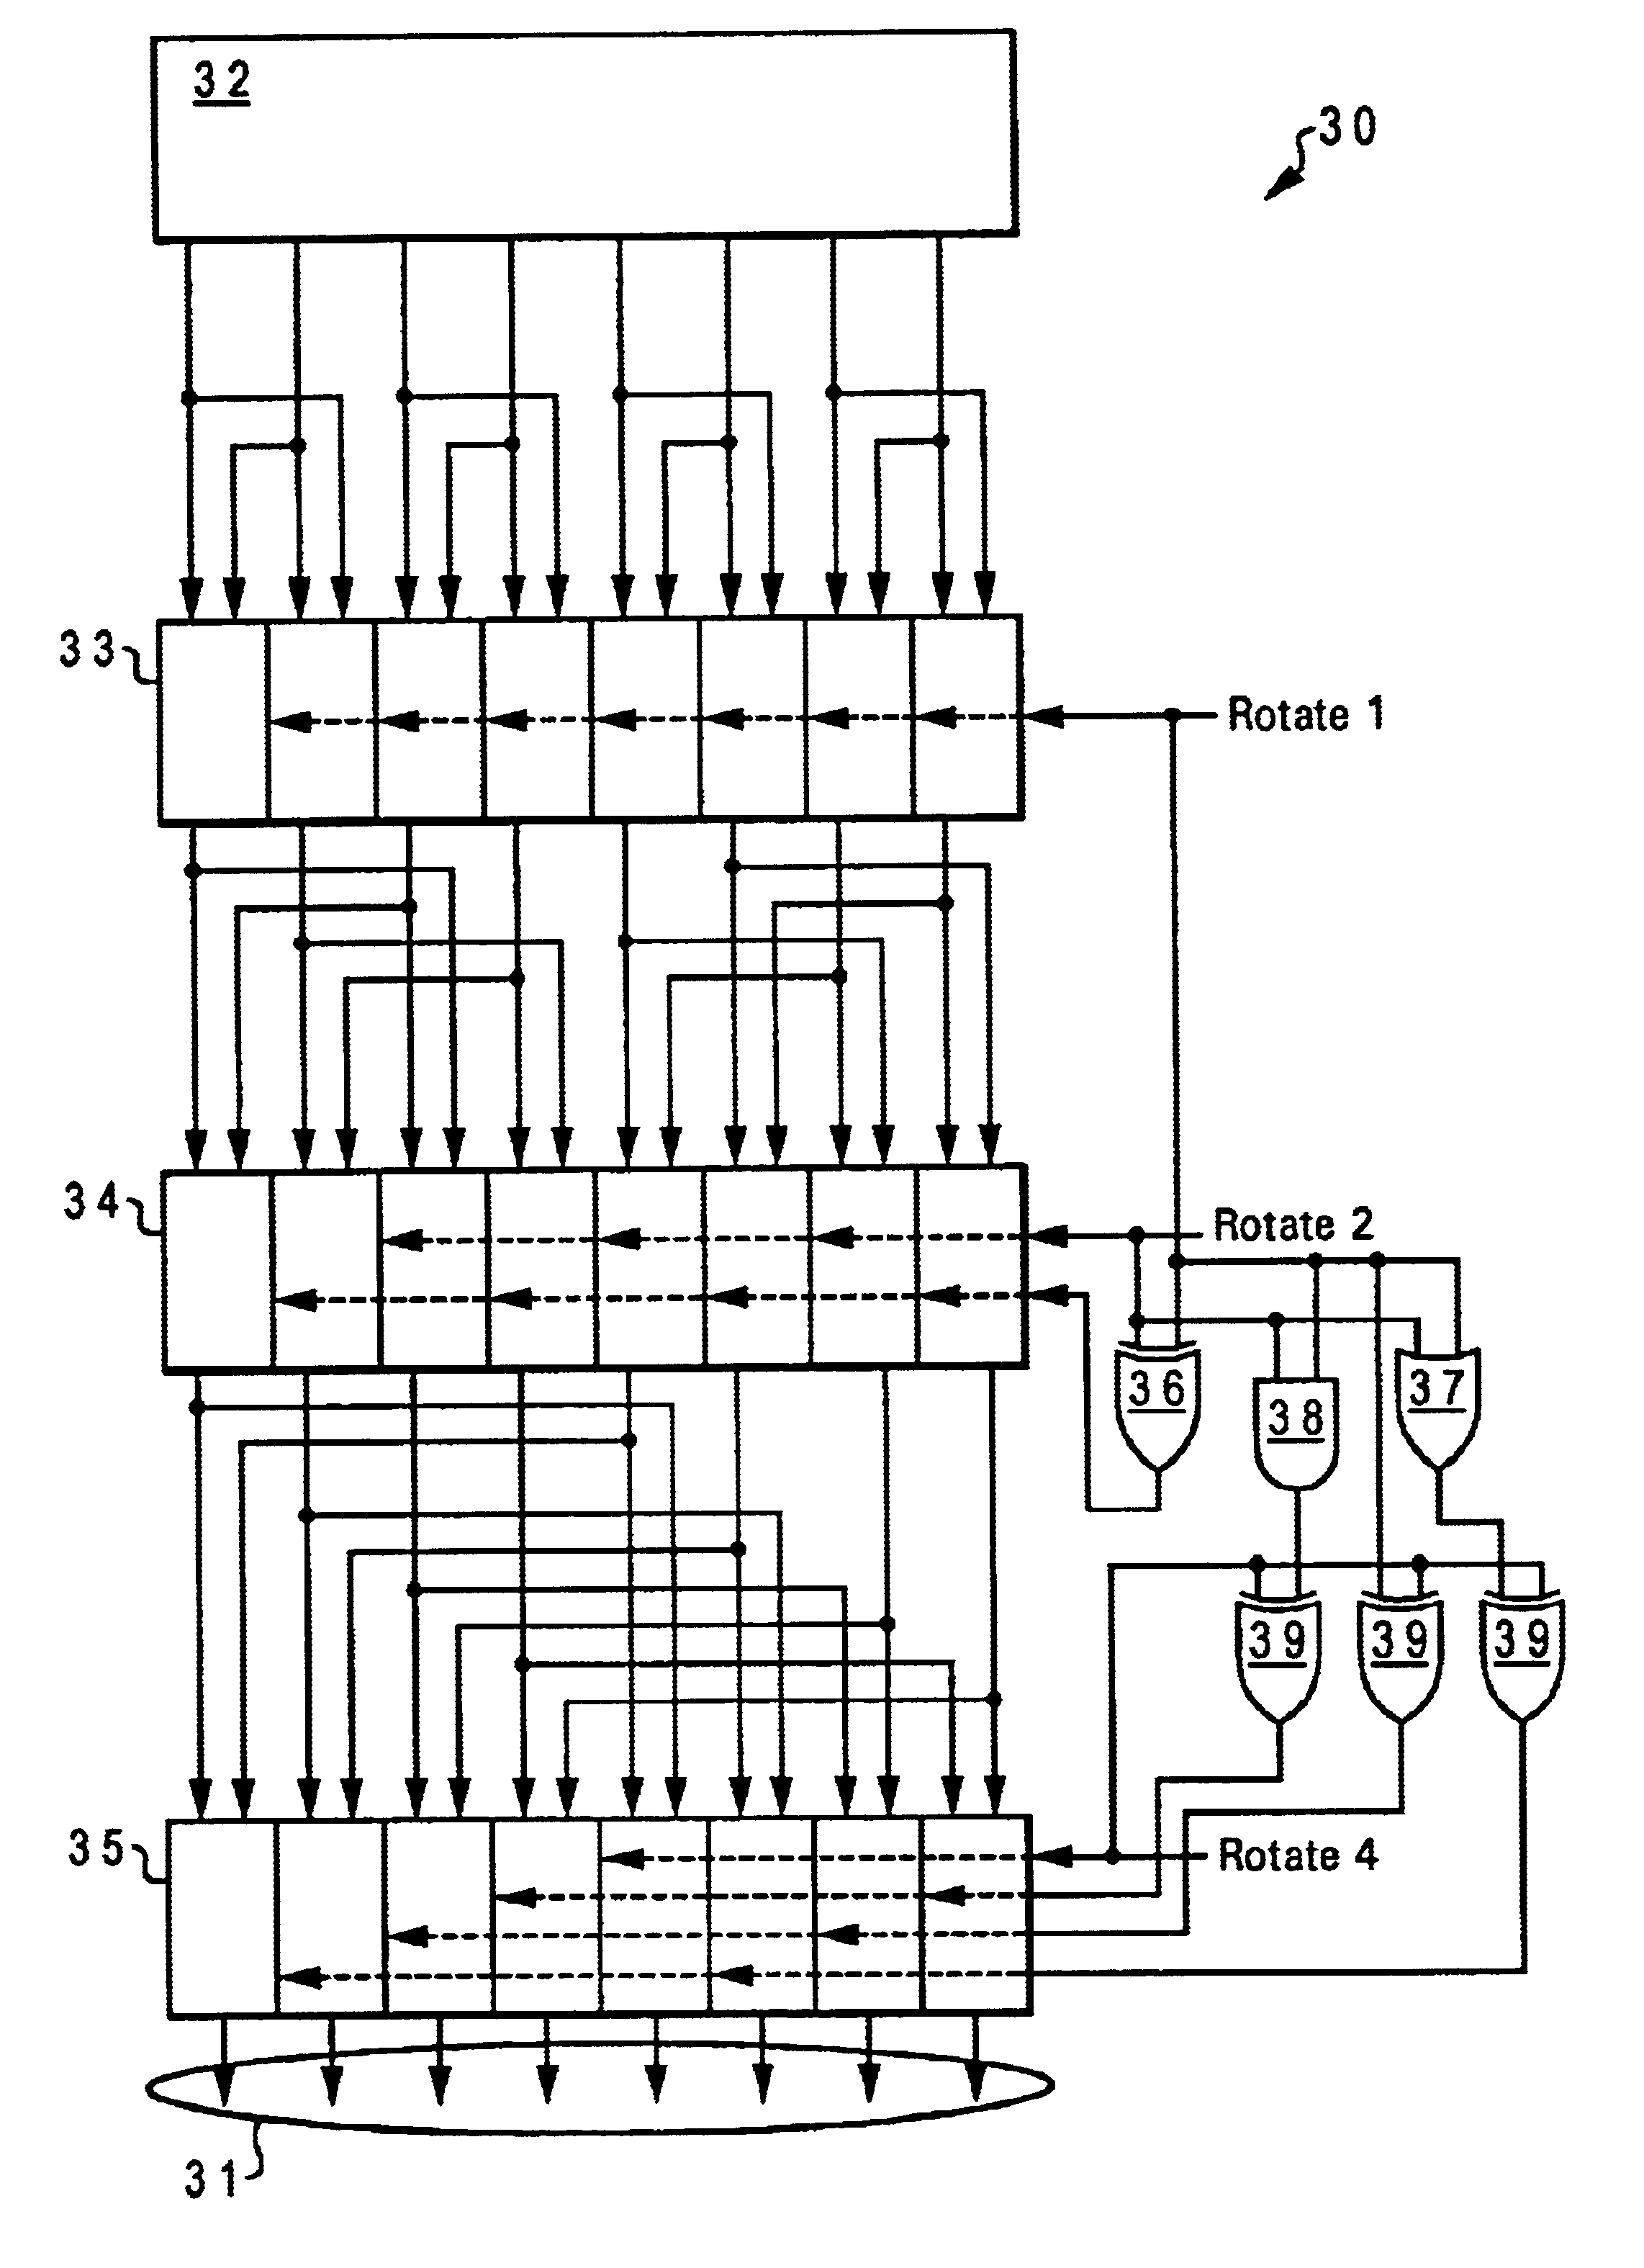 Method and apparatus for performing rotate operations using cascaded multiplexers